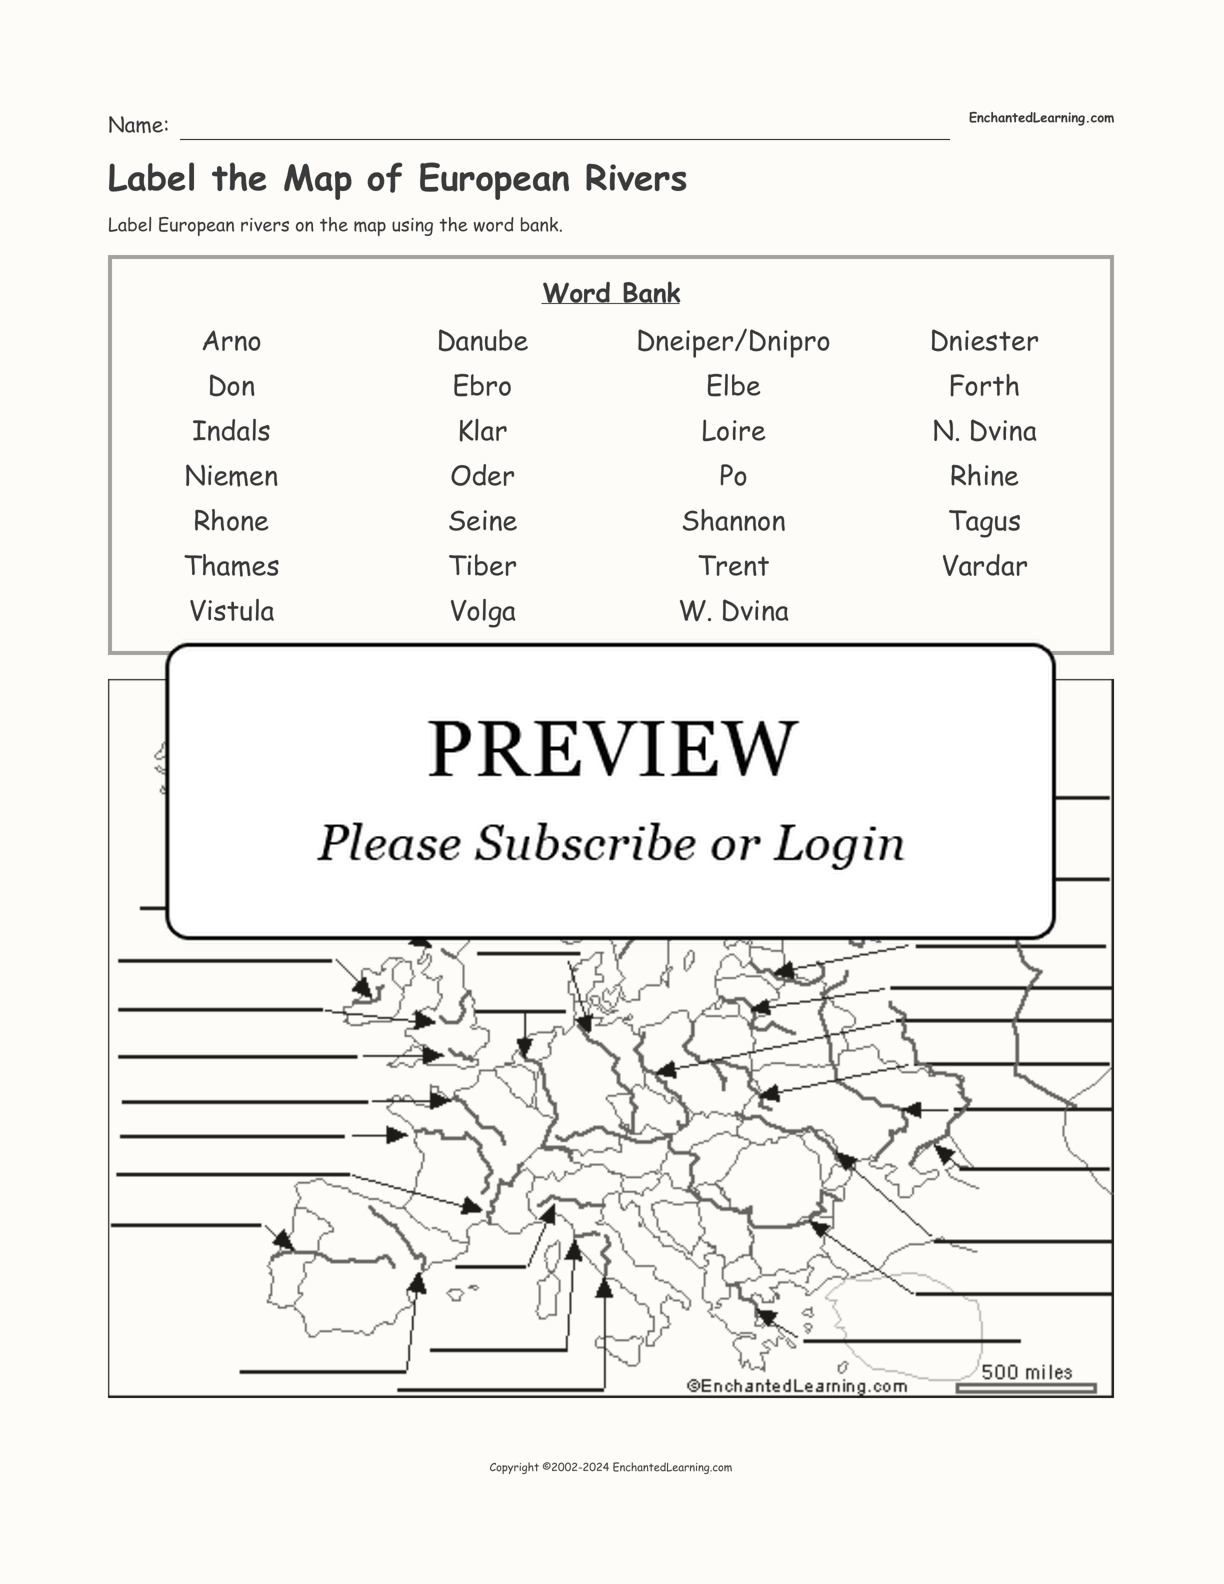 Label the Map of European Rivers interactive worksheet page 1